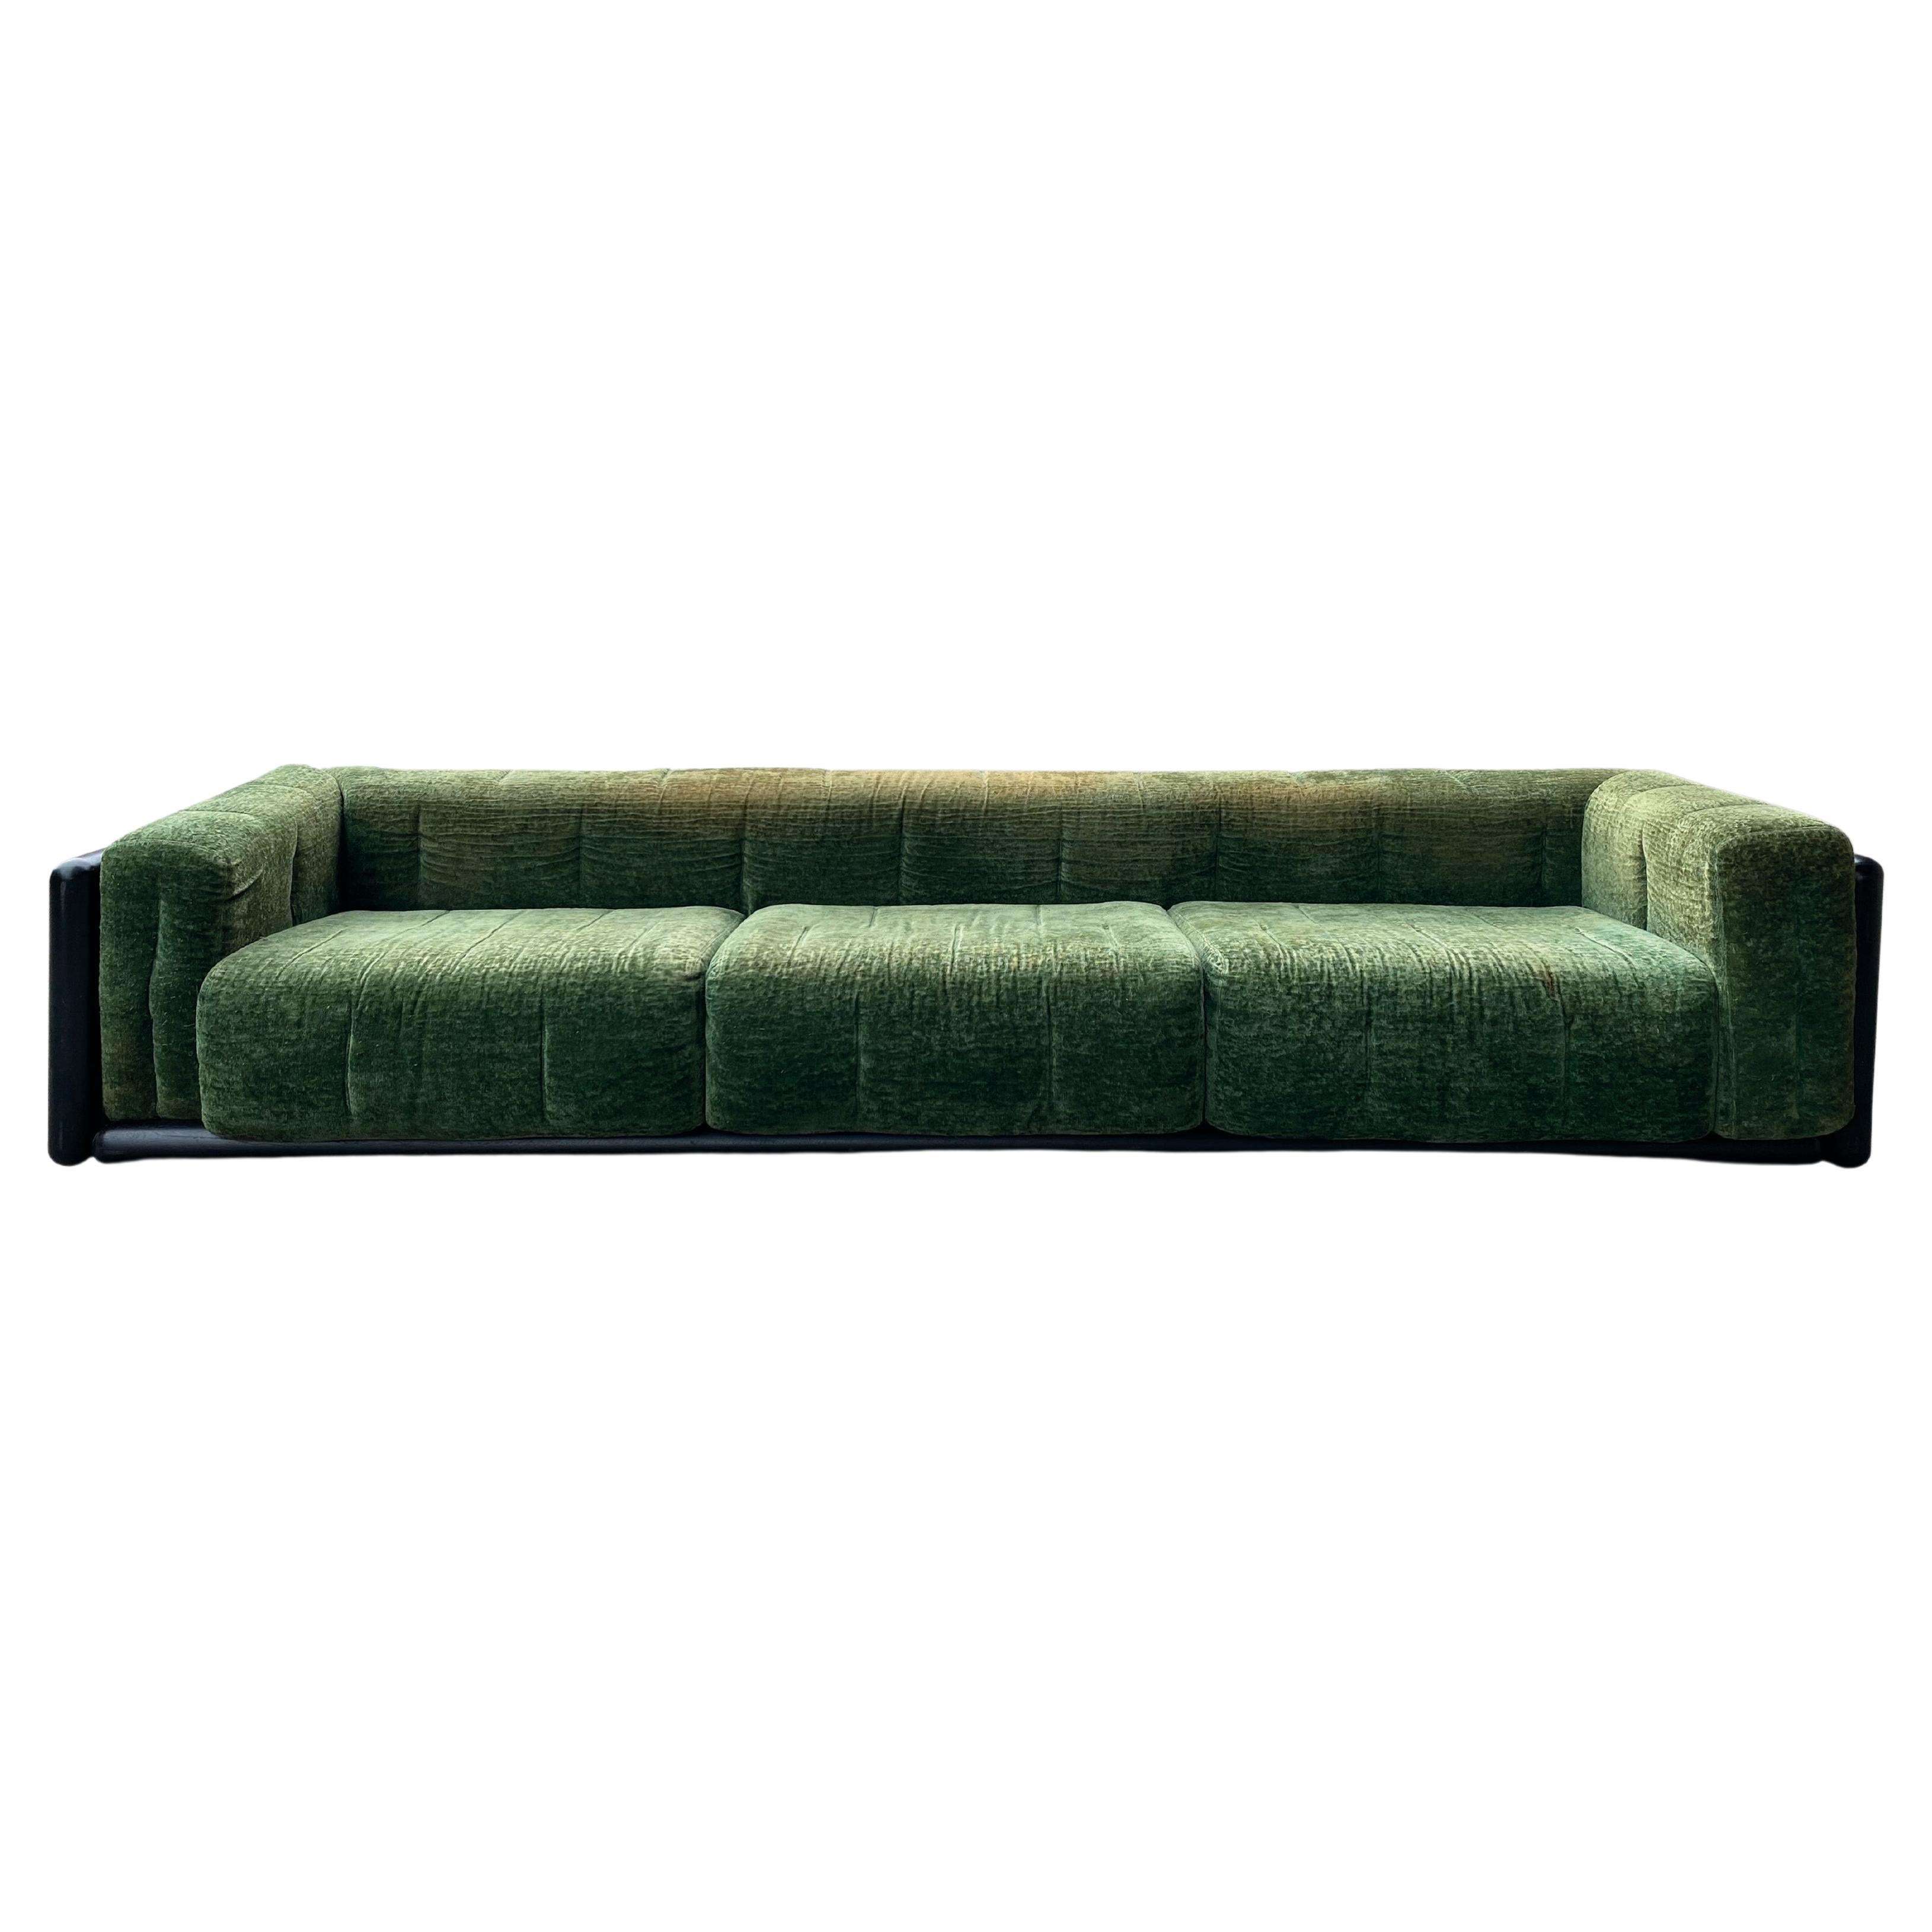 Monumental sofa designed by the famous Italian architect Carlo Scarpa for the Simon Gavina company in 1973. The sofa has a solid structure one-unit side and back cushion fastened to the frame corners. 
This is the largest version, which offers